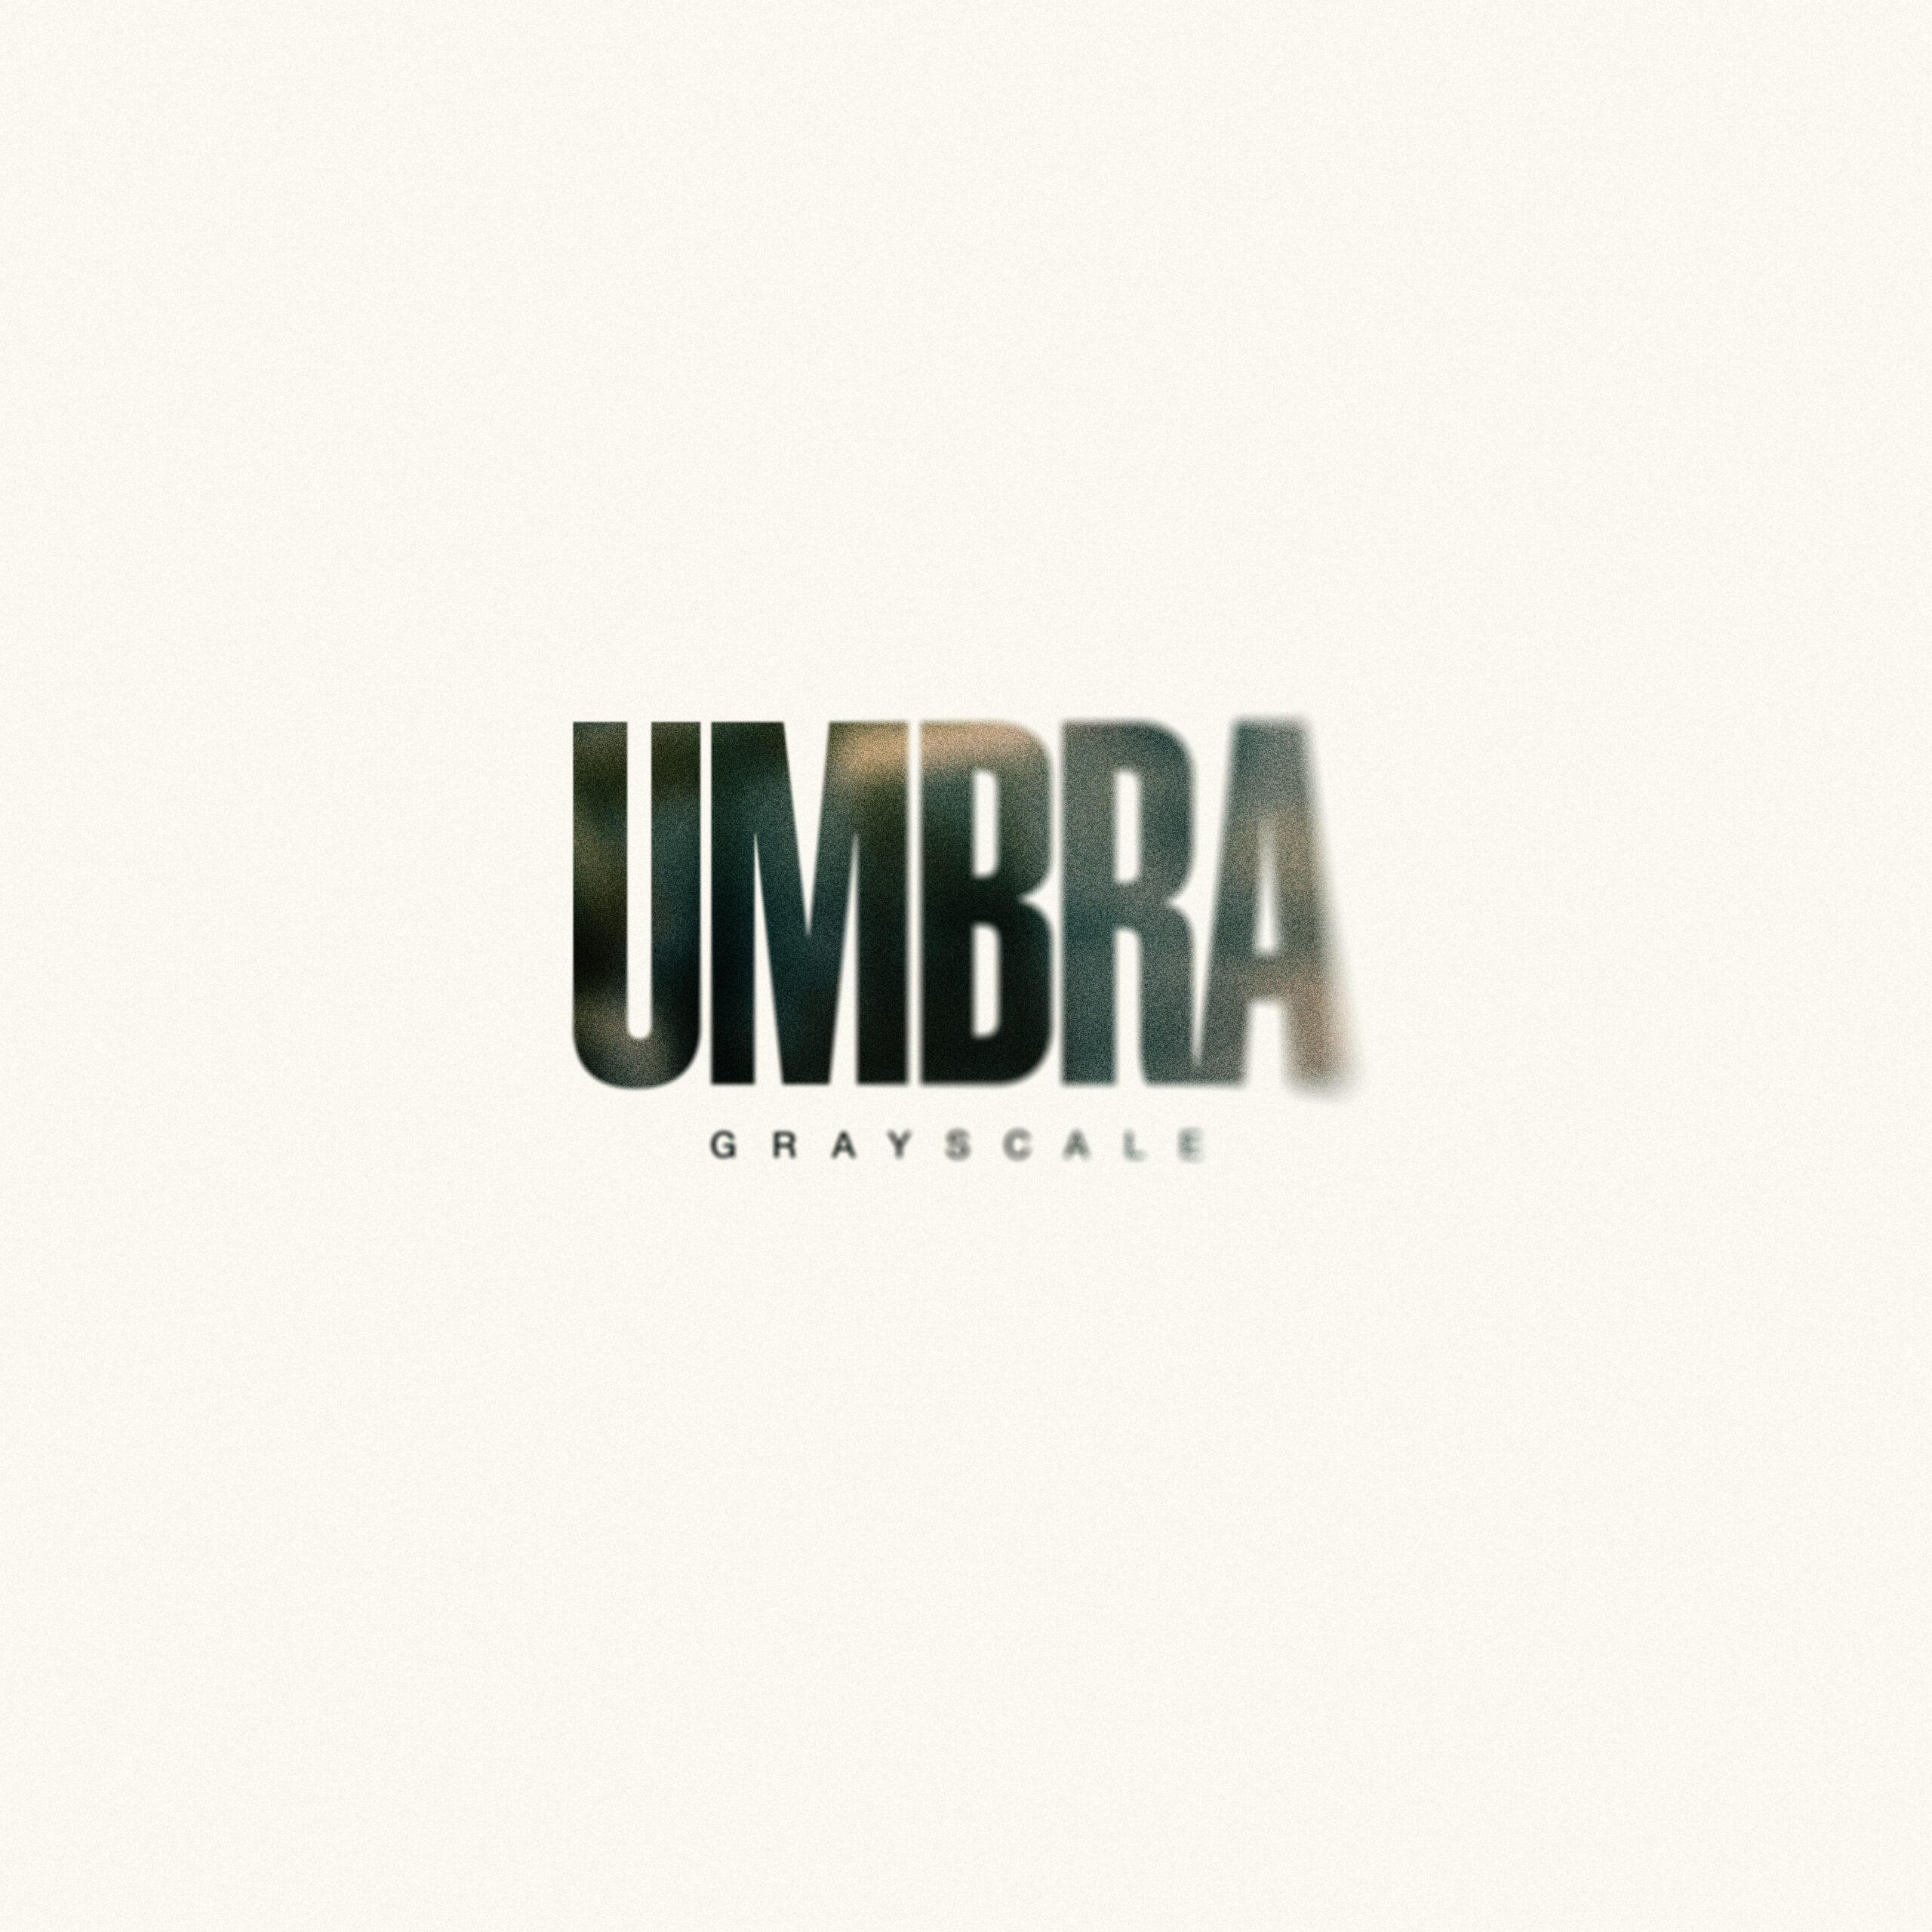 The cover for Grayscale's latest album, Umbra